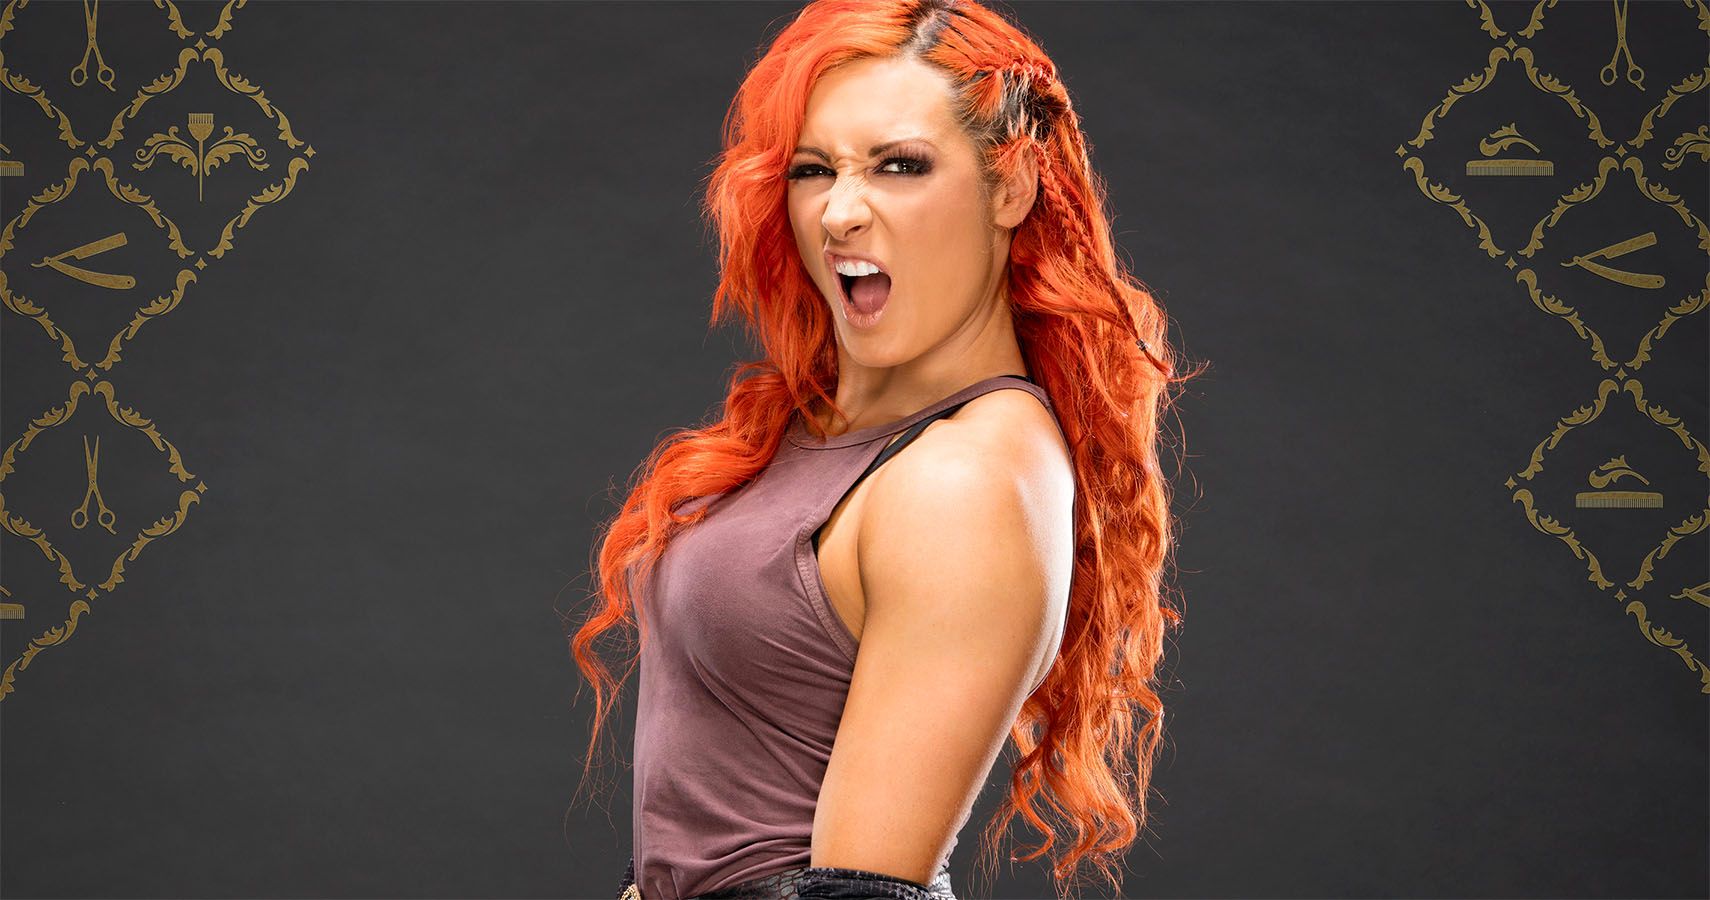 The 10 Moments That Made Becky Lynch "The Man" .